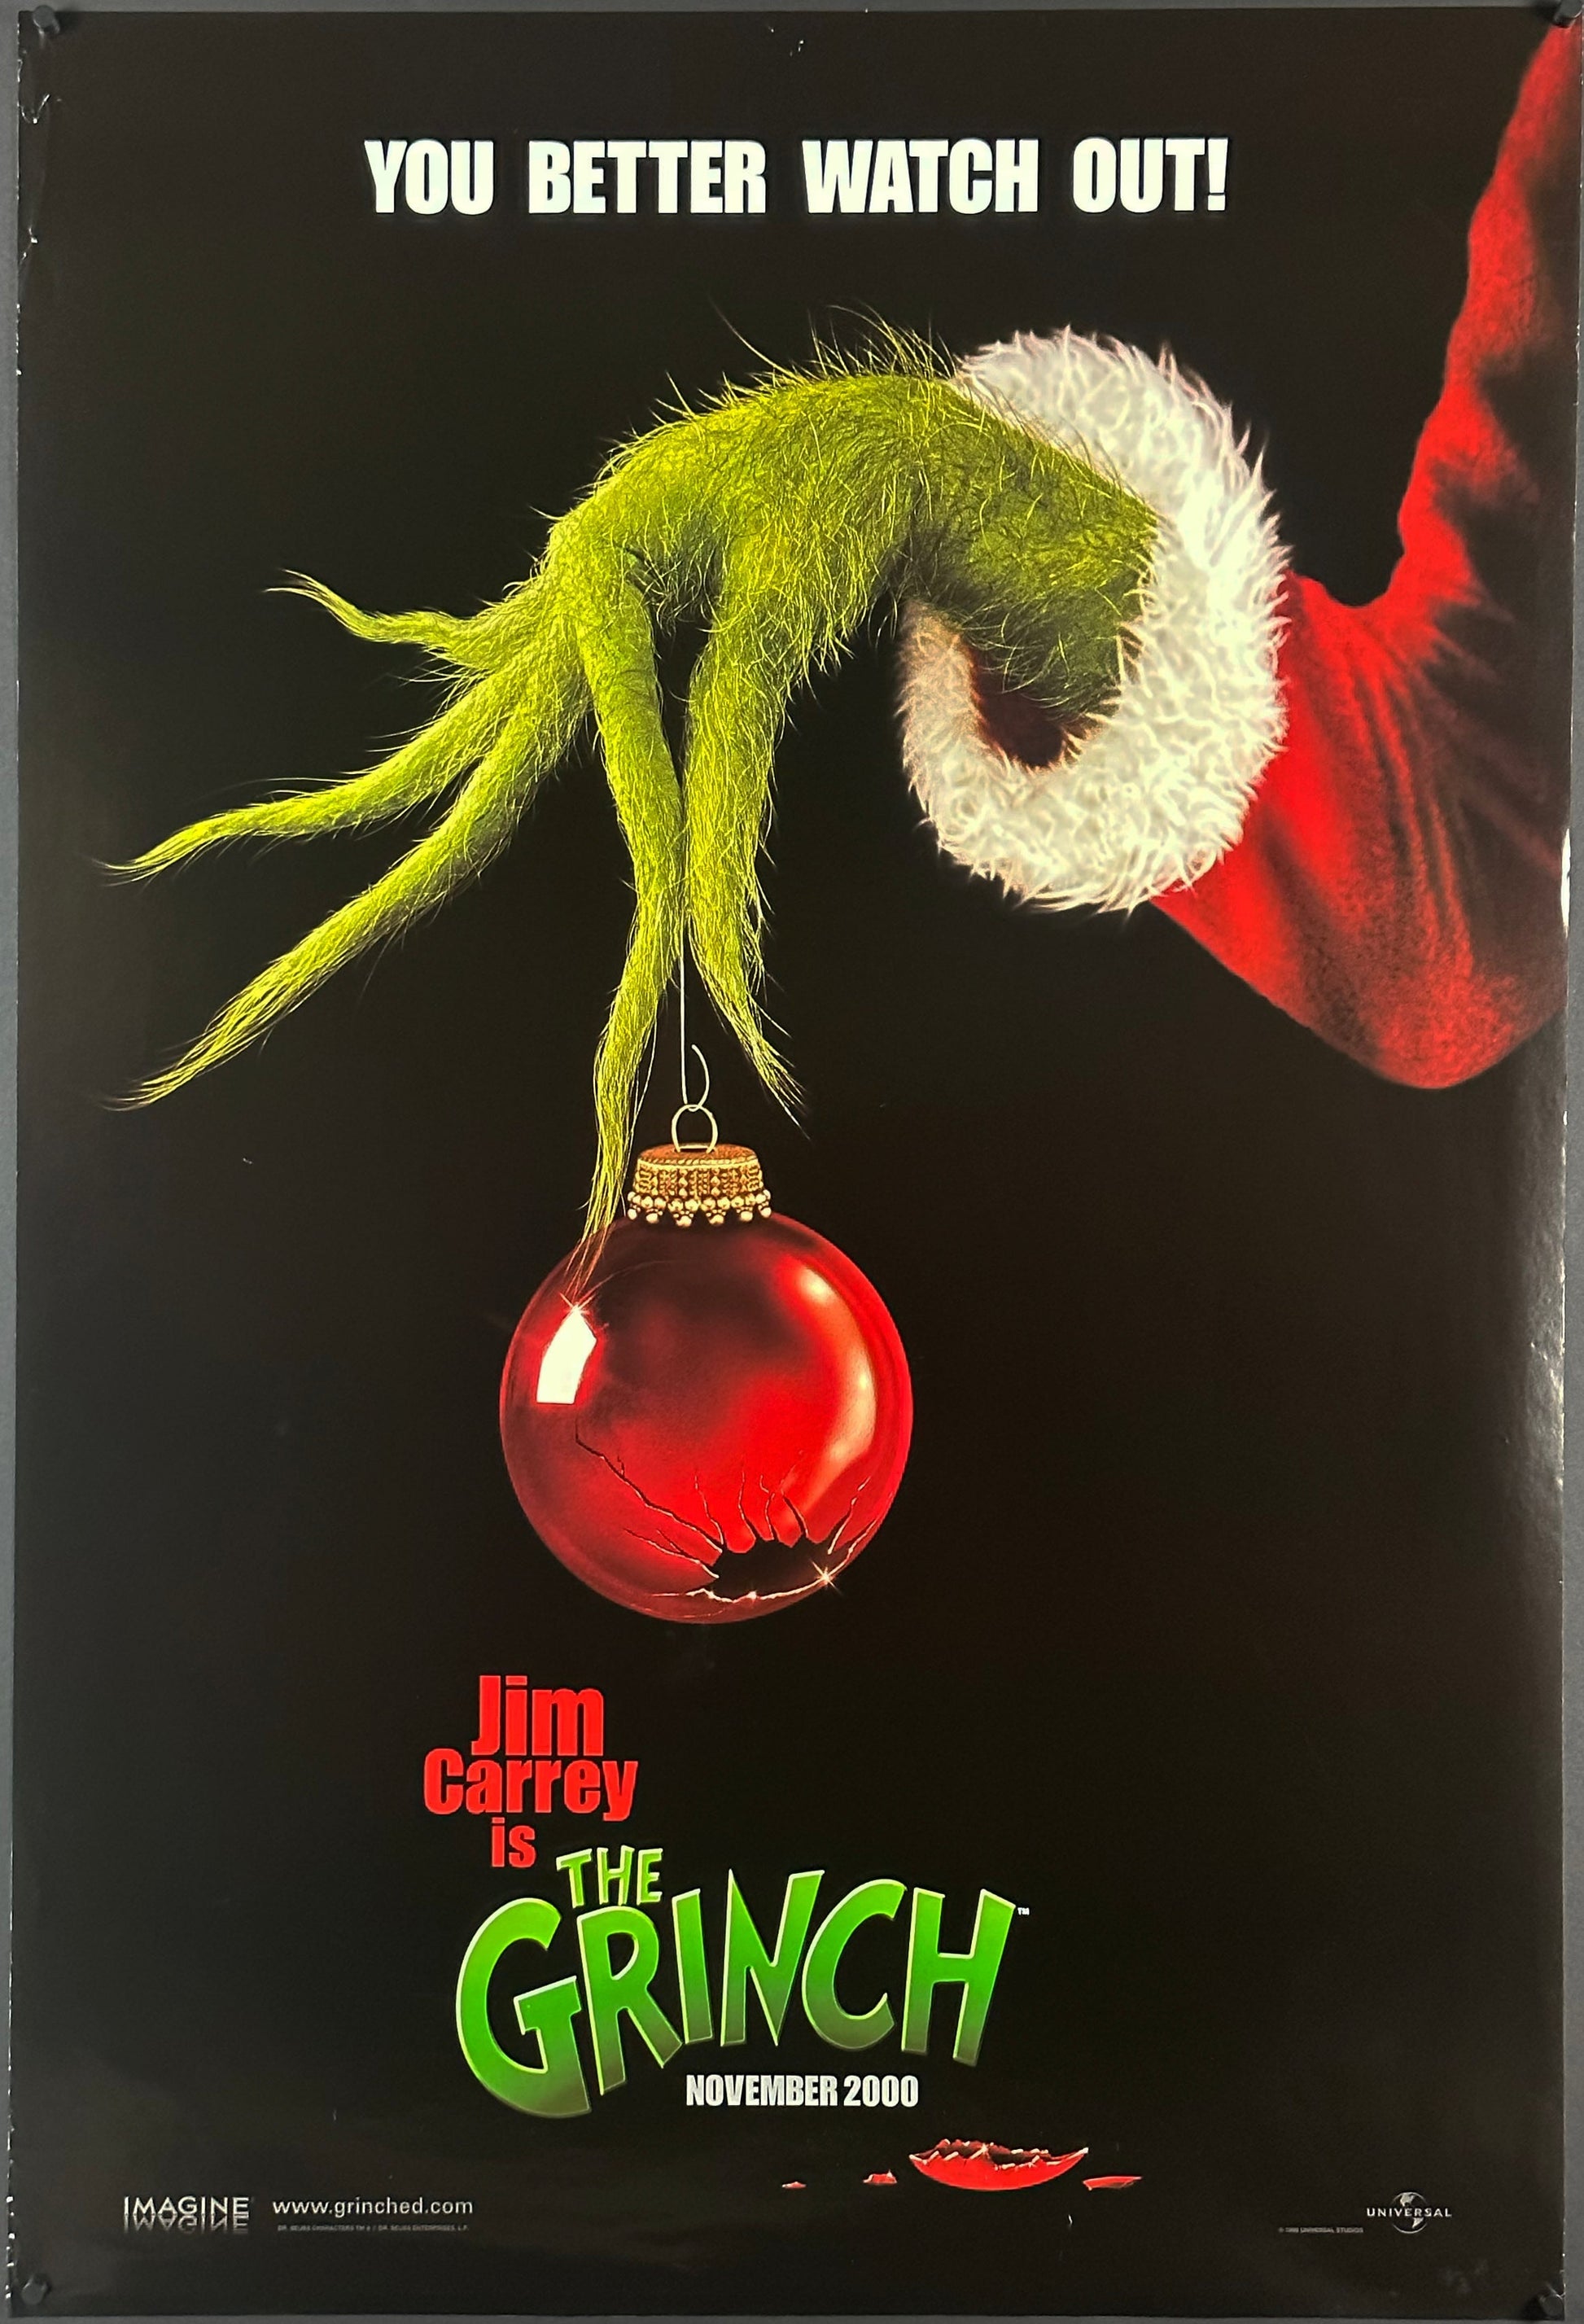 The Grinch - posterpalace.com